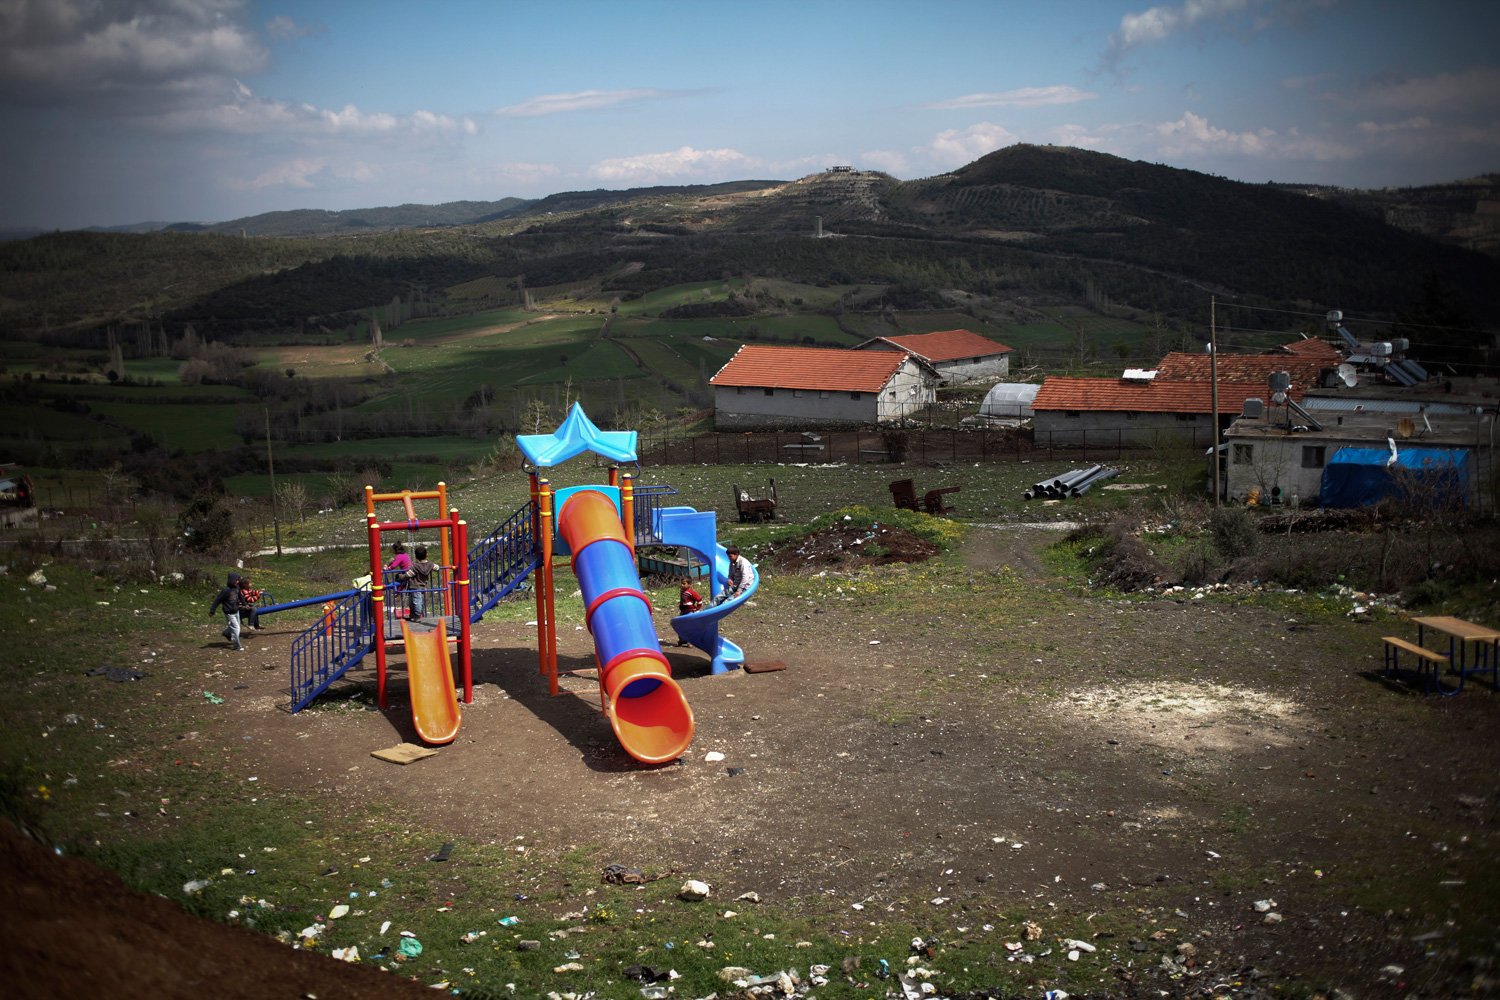 March 31, 2012. Children play on a gym set in a village 50km from Antakya in southern Turkey near the border with Syria.